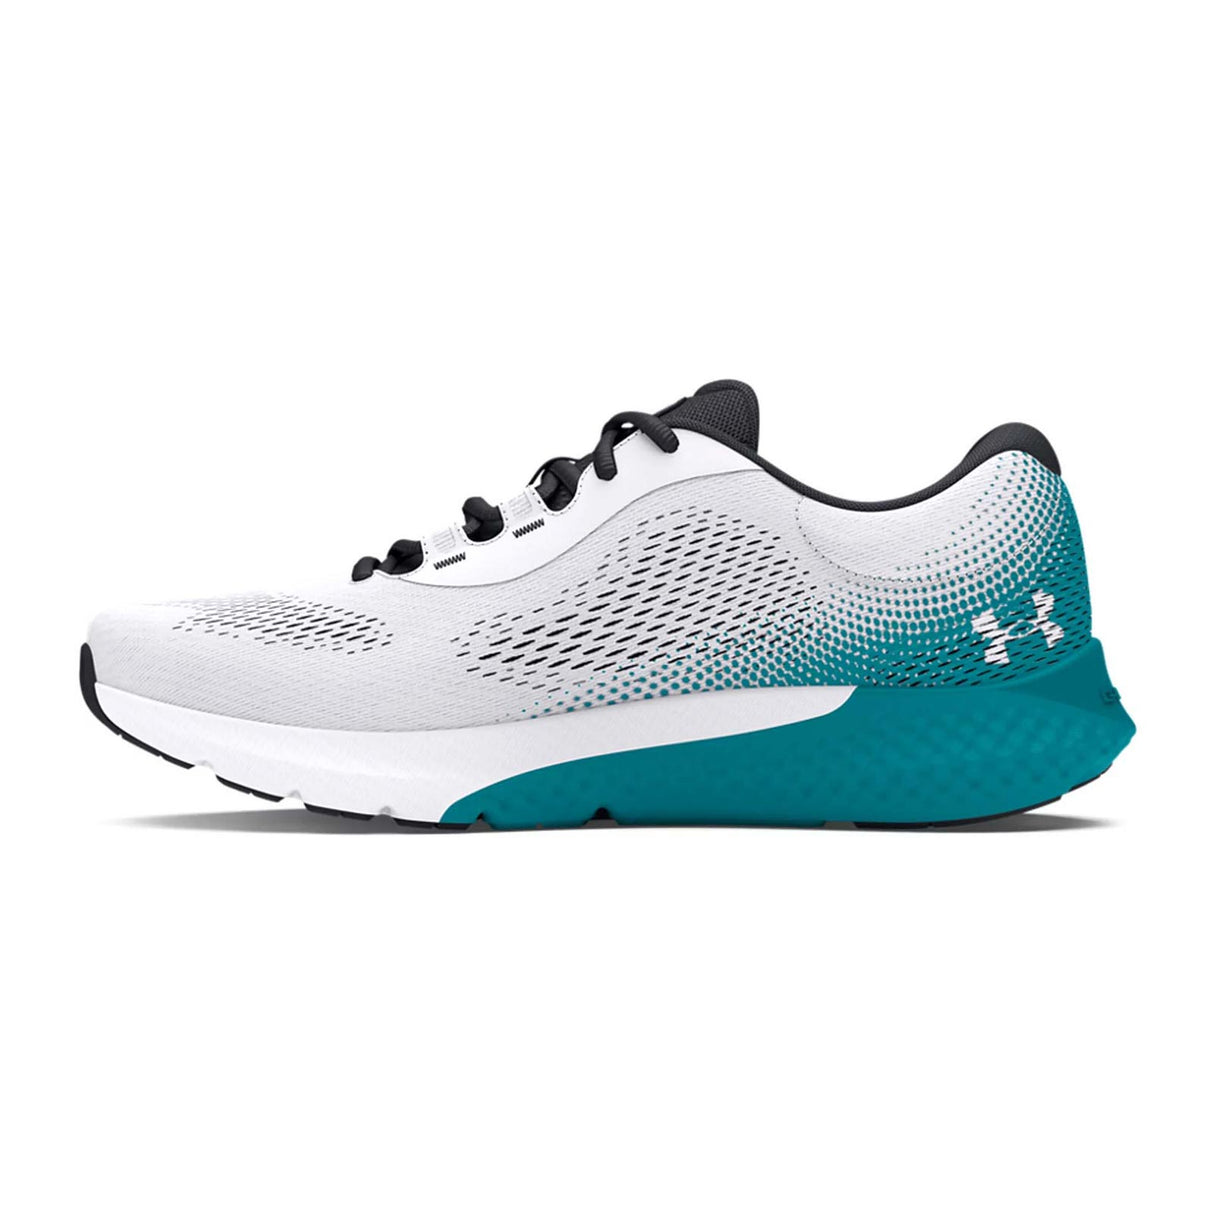 Under Armour Charged Rogue 4 Mens Running Shoes